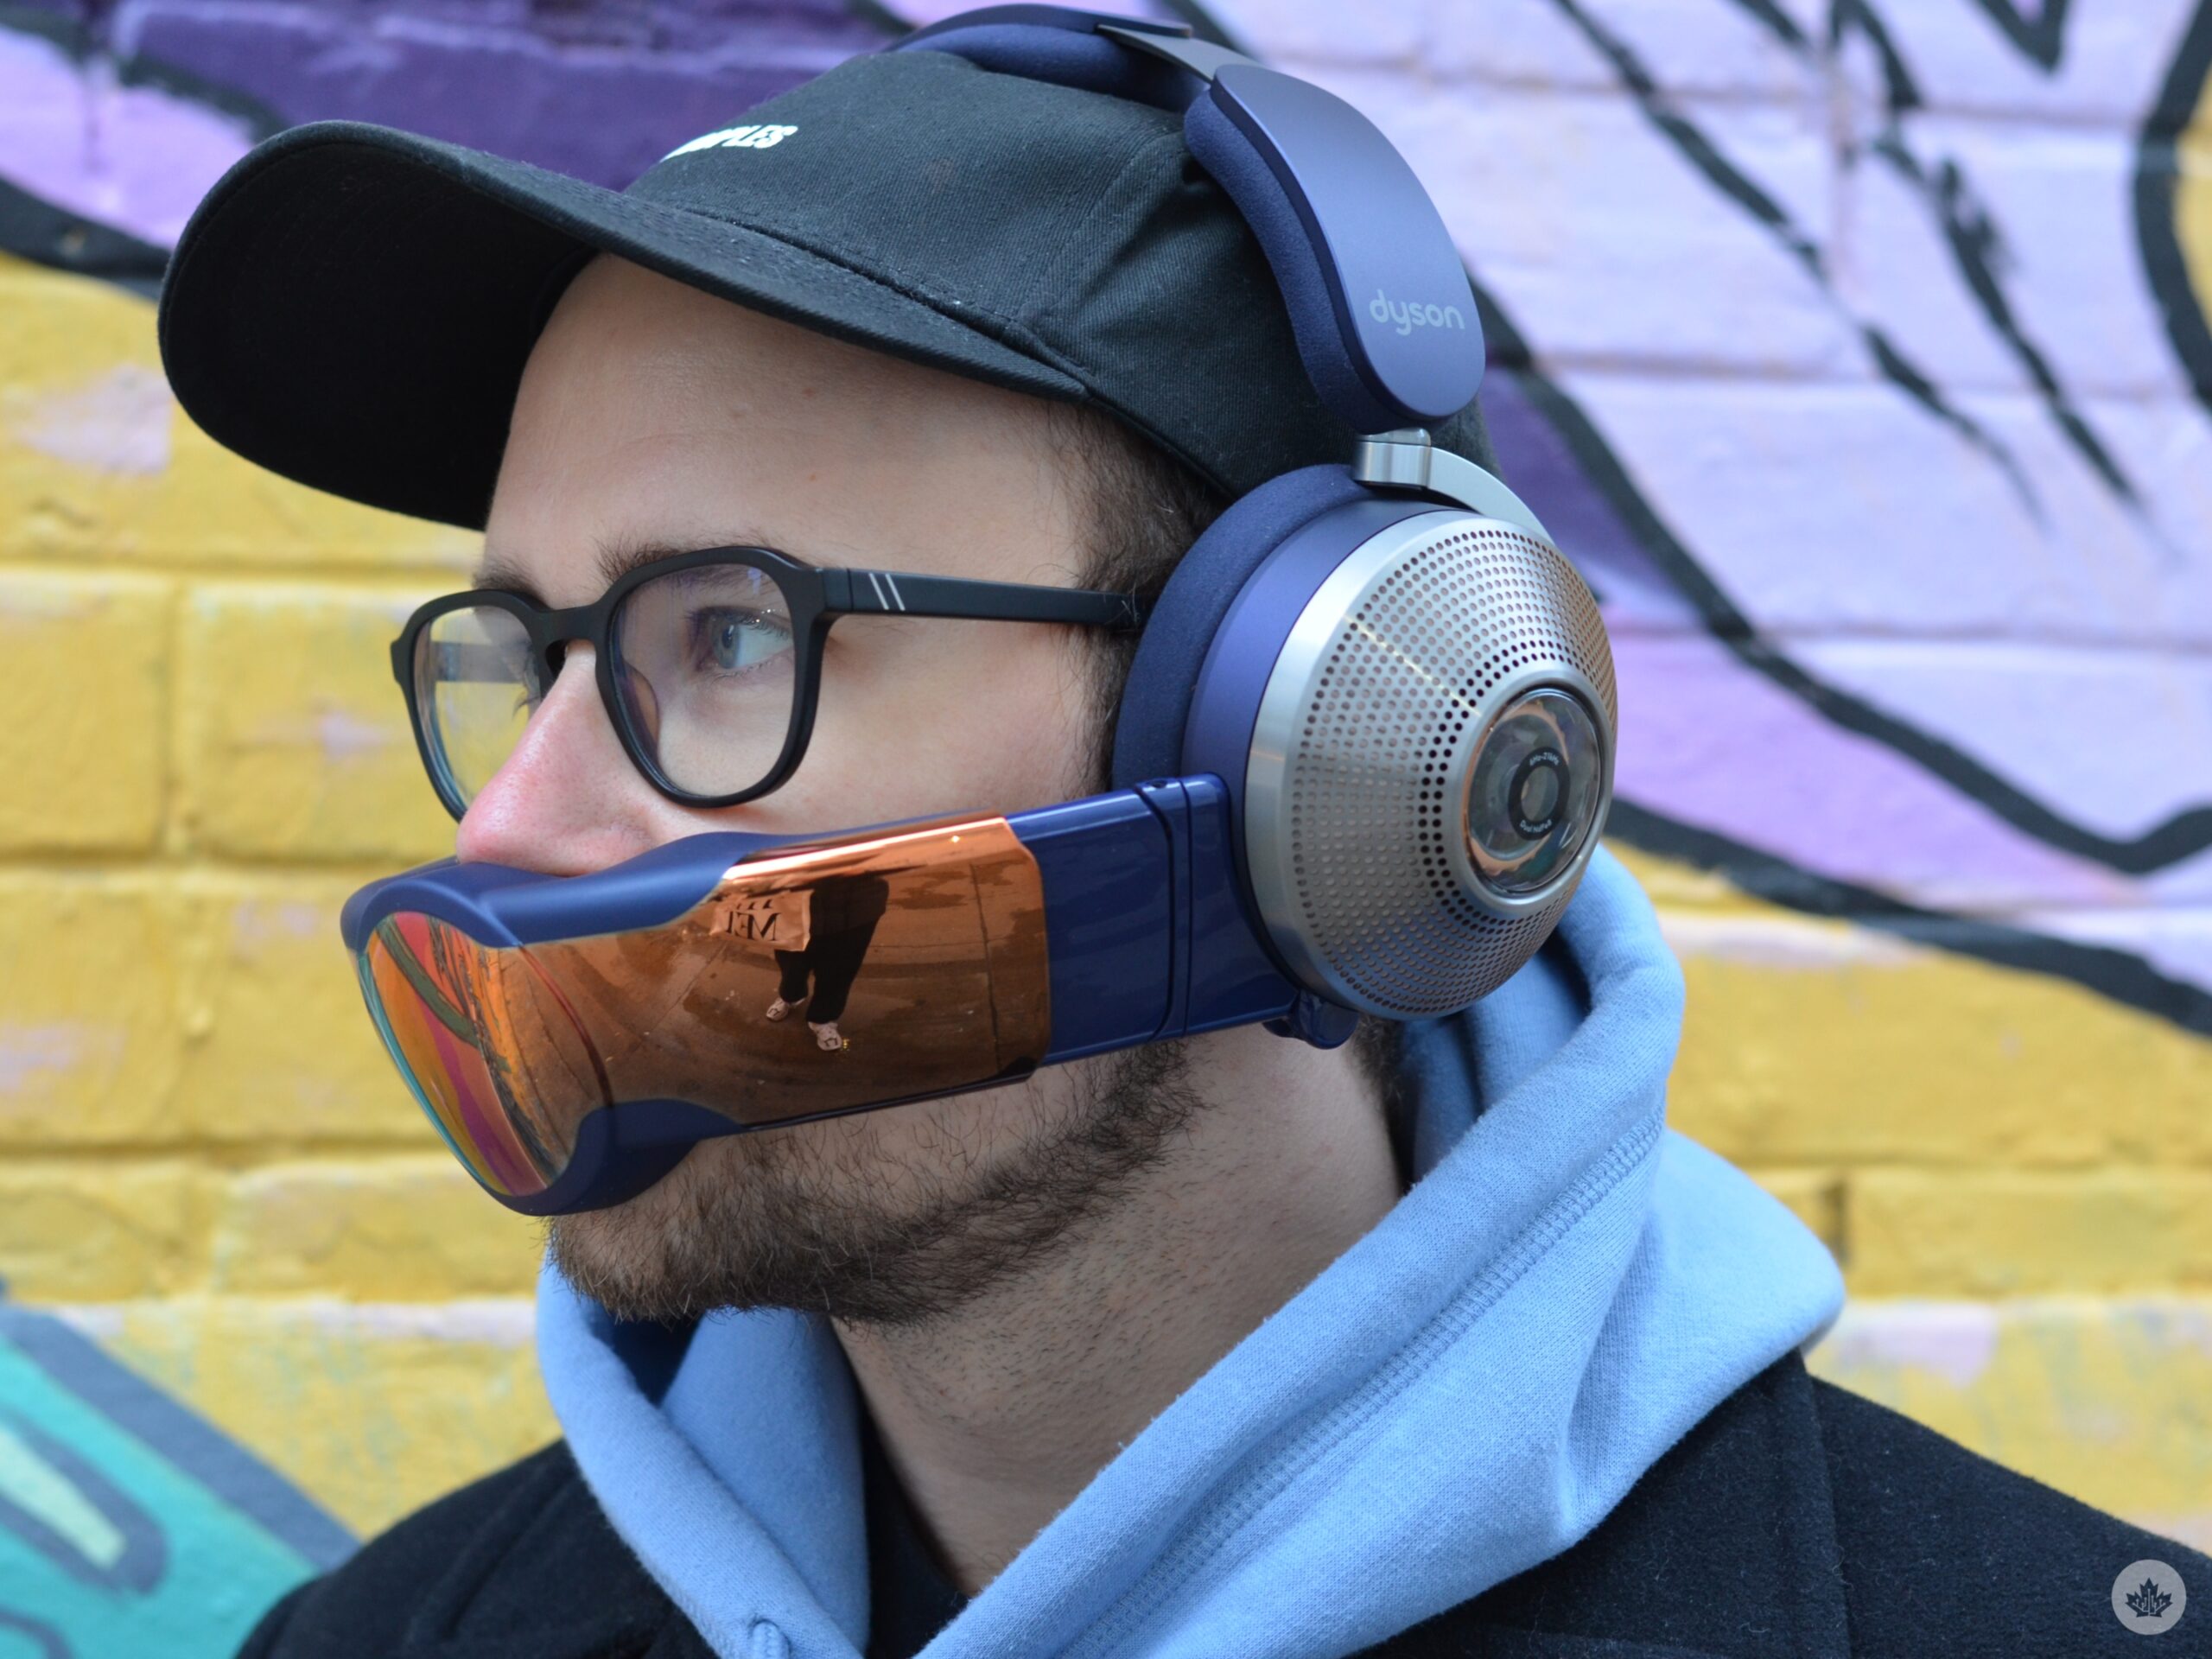 The Dyson Zone is the wackiest yet cleanest pair of headphones I’ve ever owned